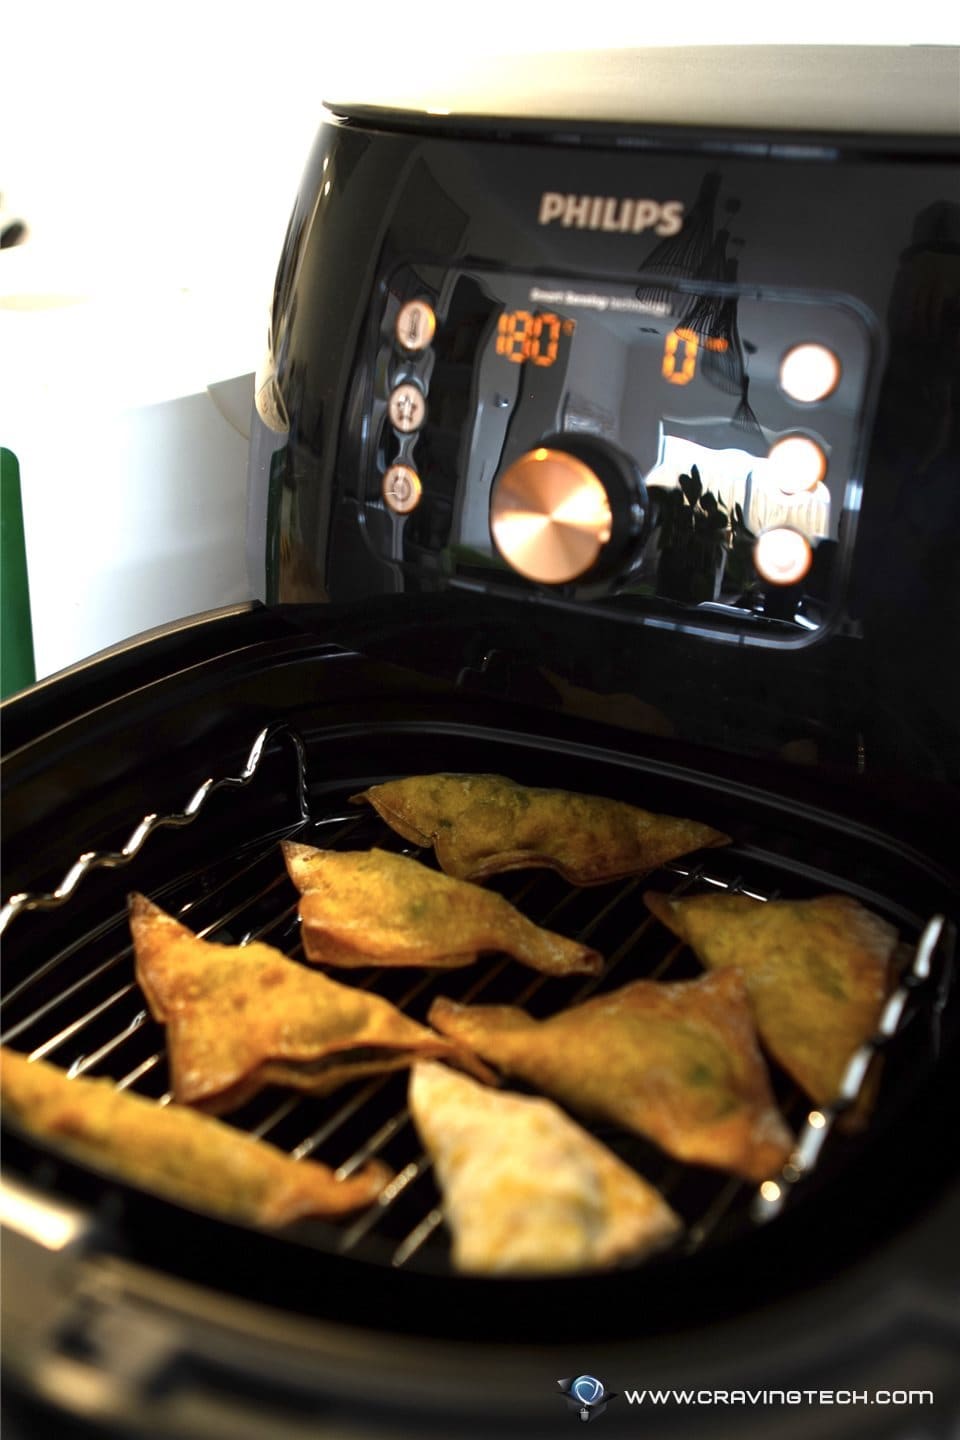 Philips Airfryer XXL with Smart Sensing Technology is the new must